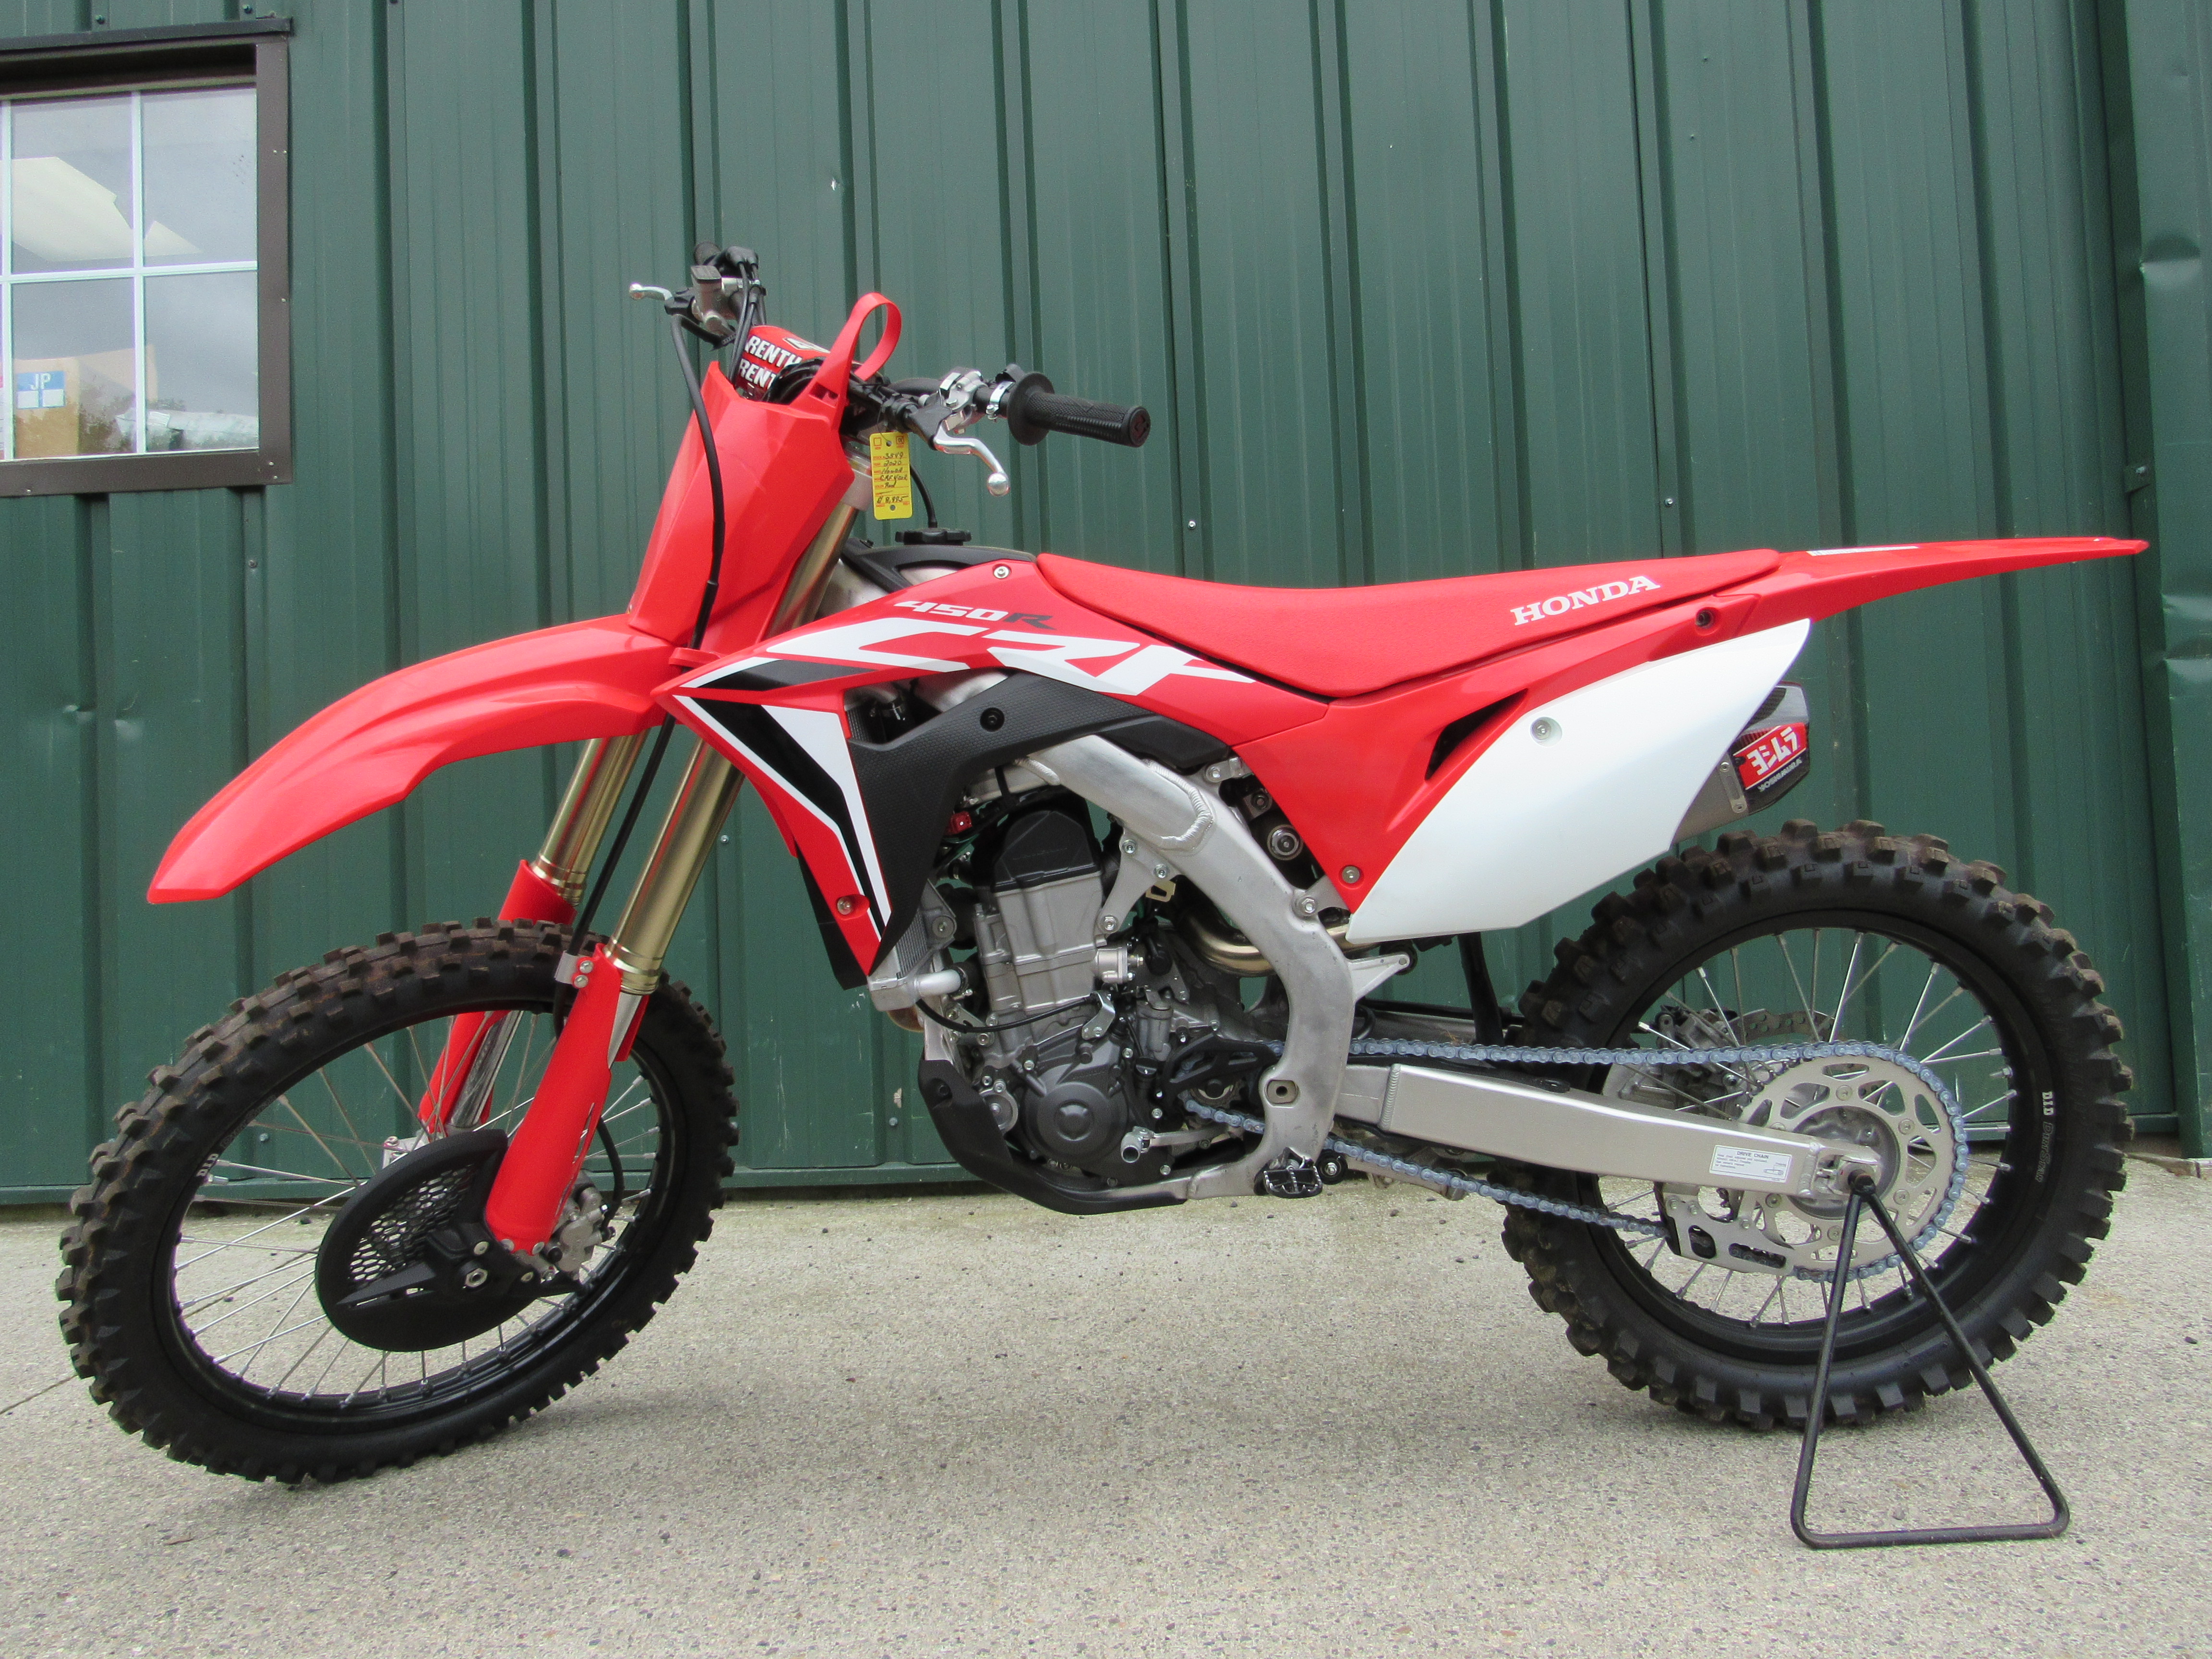 2020 CRF 450R LIKE NEW CRF 450R LIKE NEW 3549 - Click for larger photo